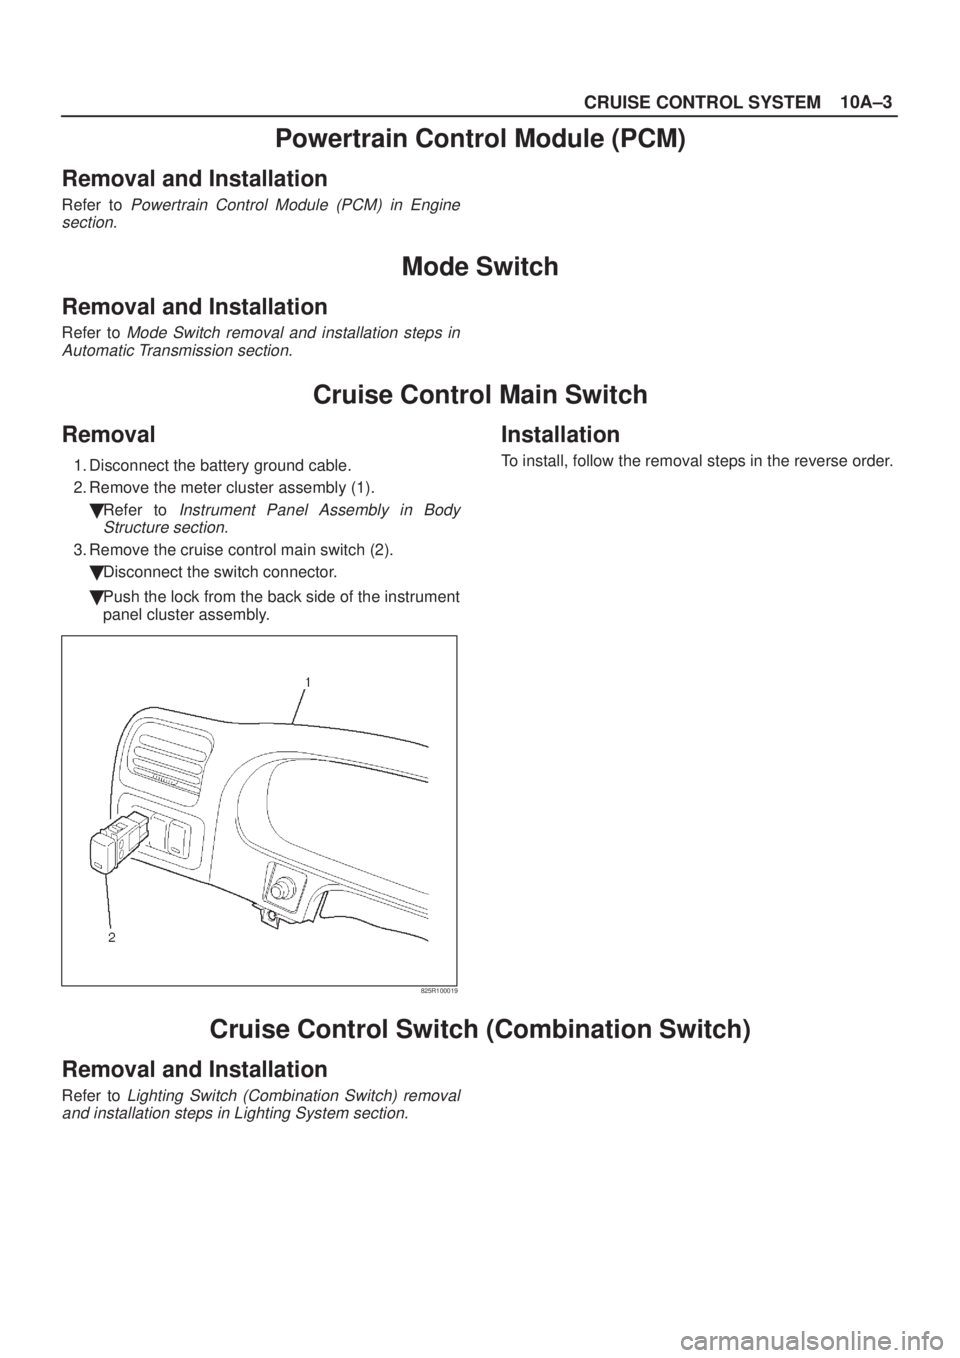 ISUZU AXIOM 2002  Service Repair Manual 10A±3
CRUISE CONTROL SYSTEM
Powertrain Control Module (PCM)
Removal and Installation
Refer to Powertrain Control Module (PCM) in Engine
section.
Mode Switch
Removal and Installation
Refer to Mode Swi